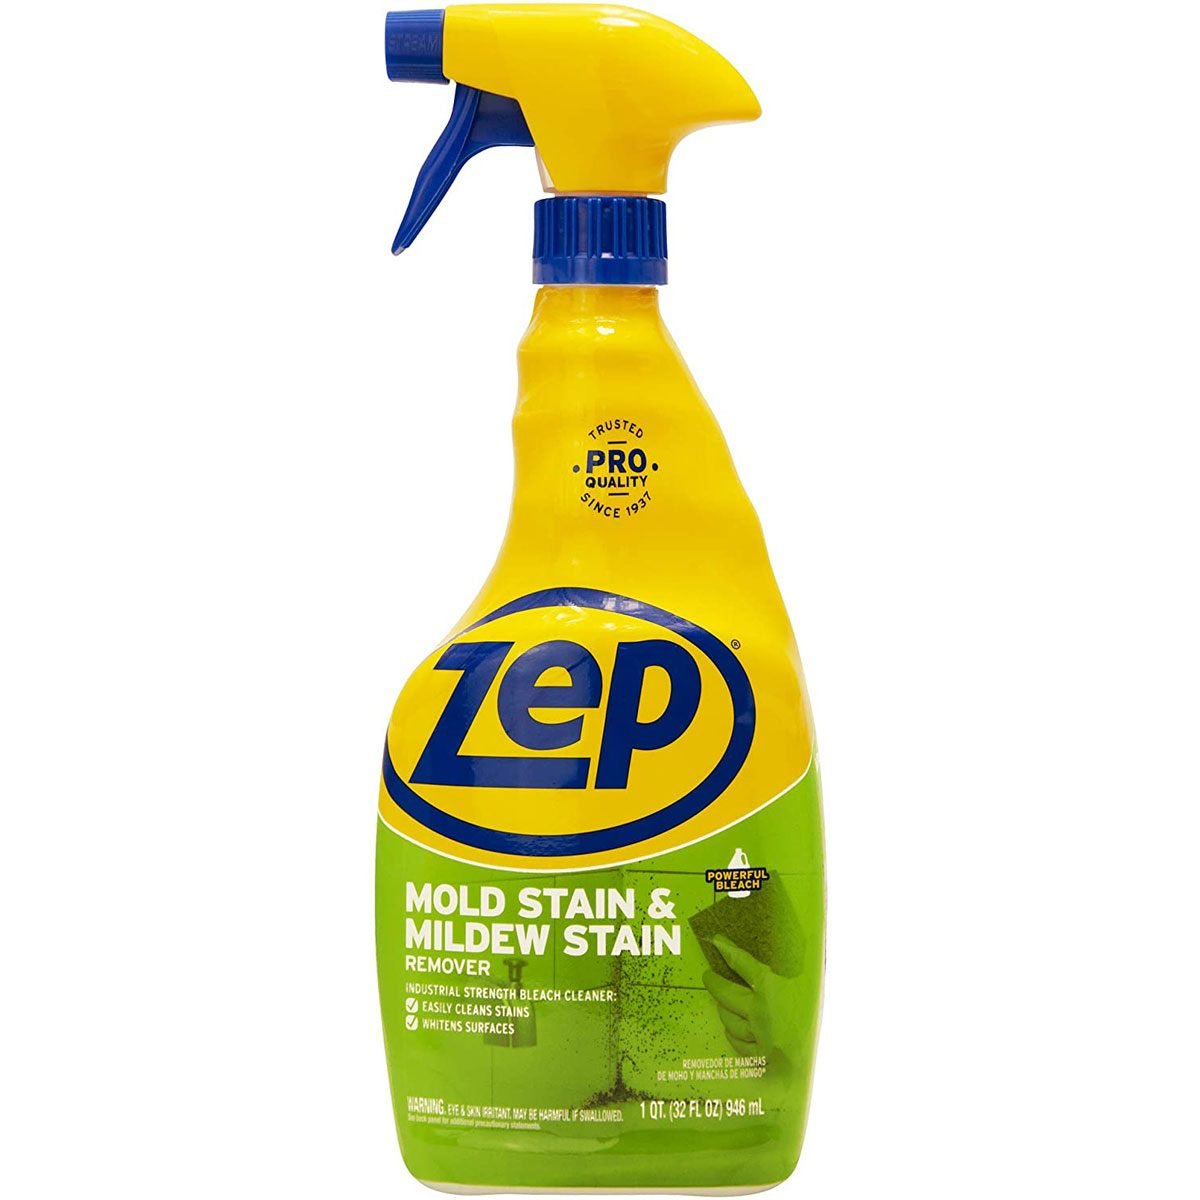 Mold cleaner